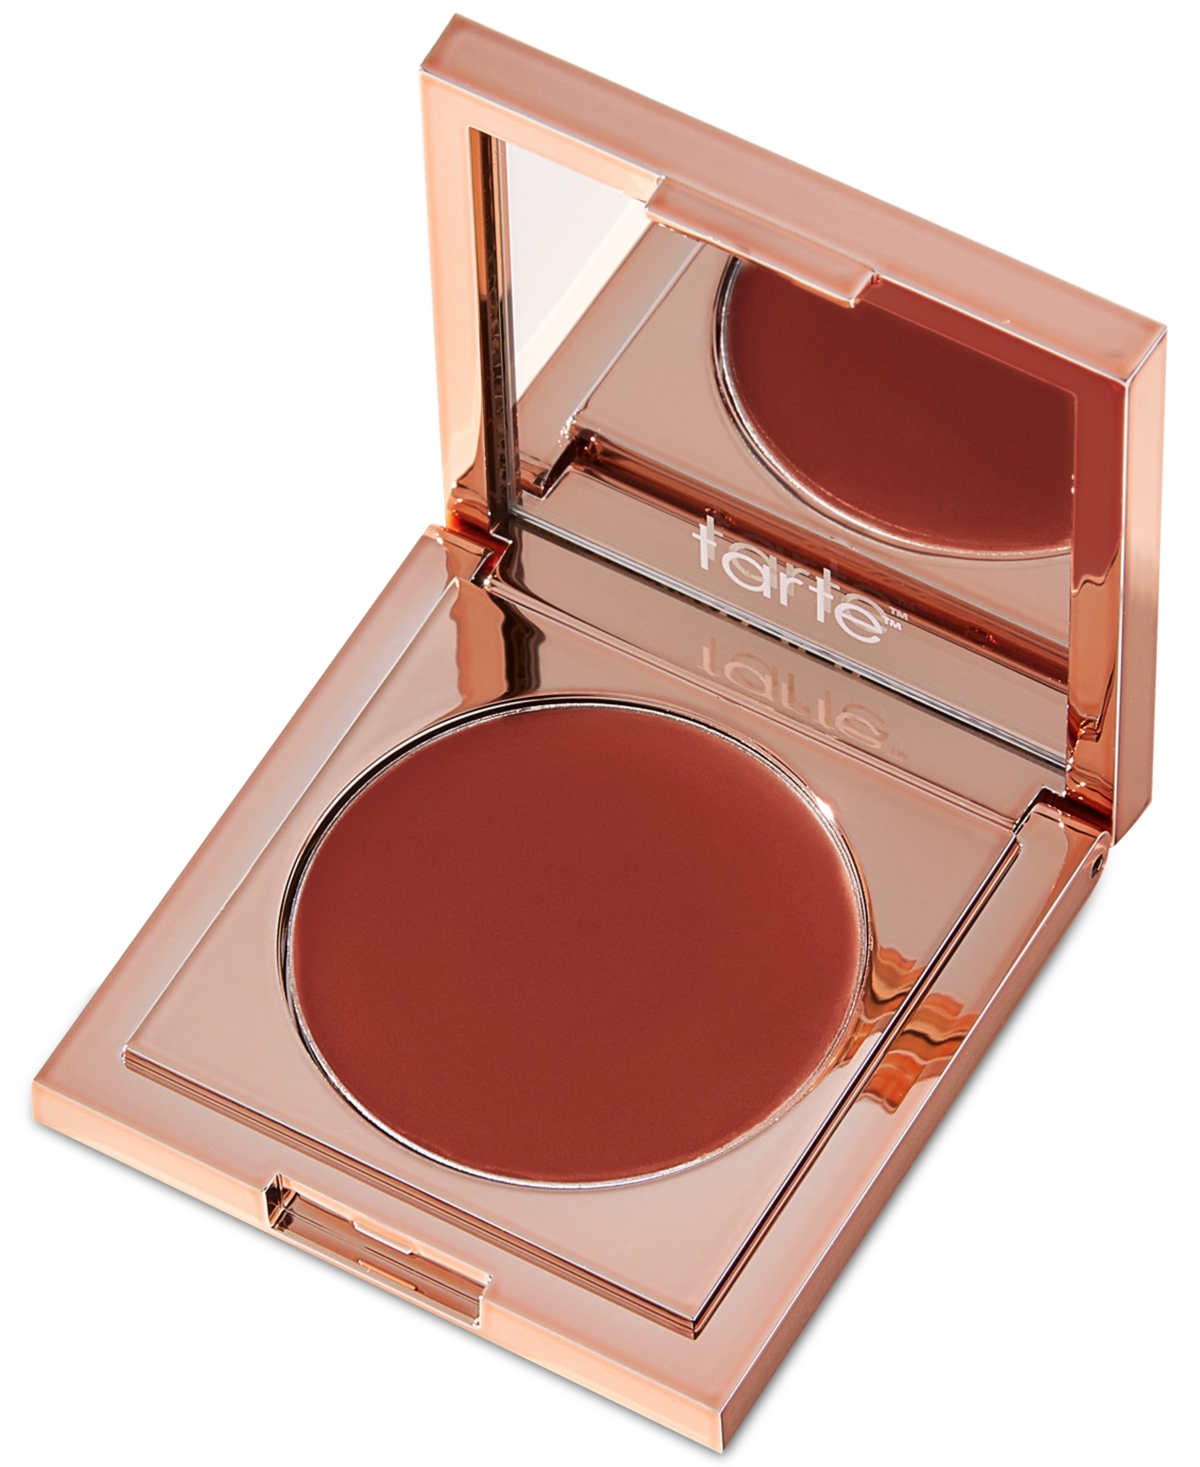 Shop Tarte Colored Clay Cc Undereye Corrector In Red